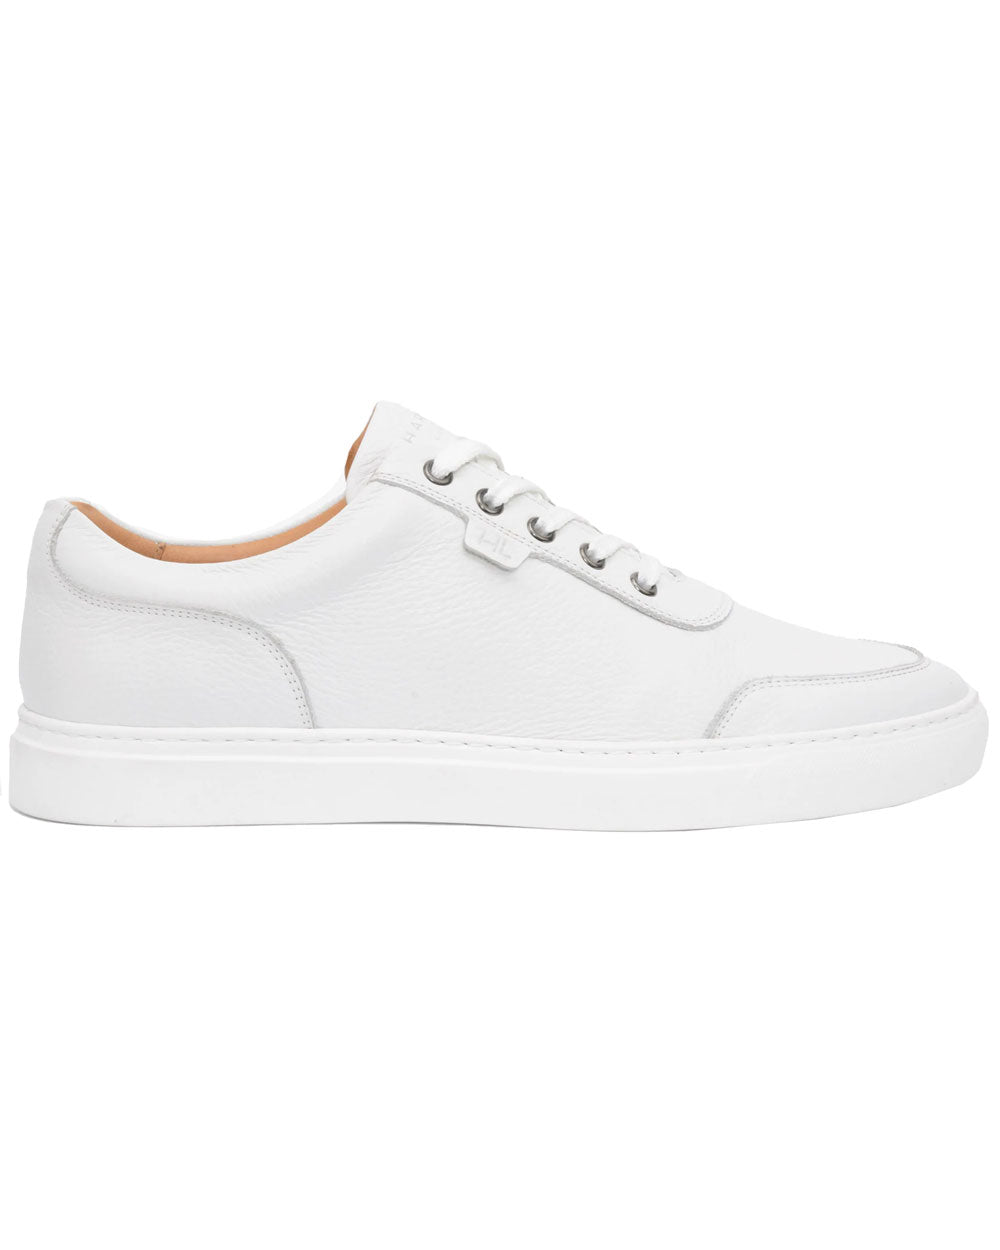 Nimble Leather Sneaker in White